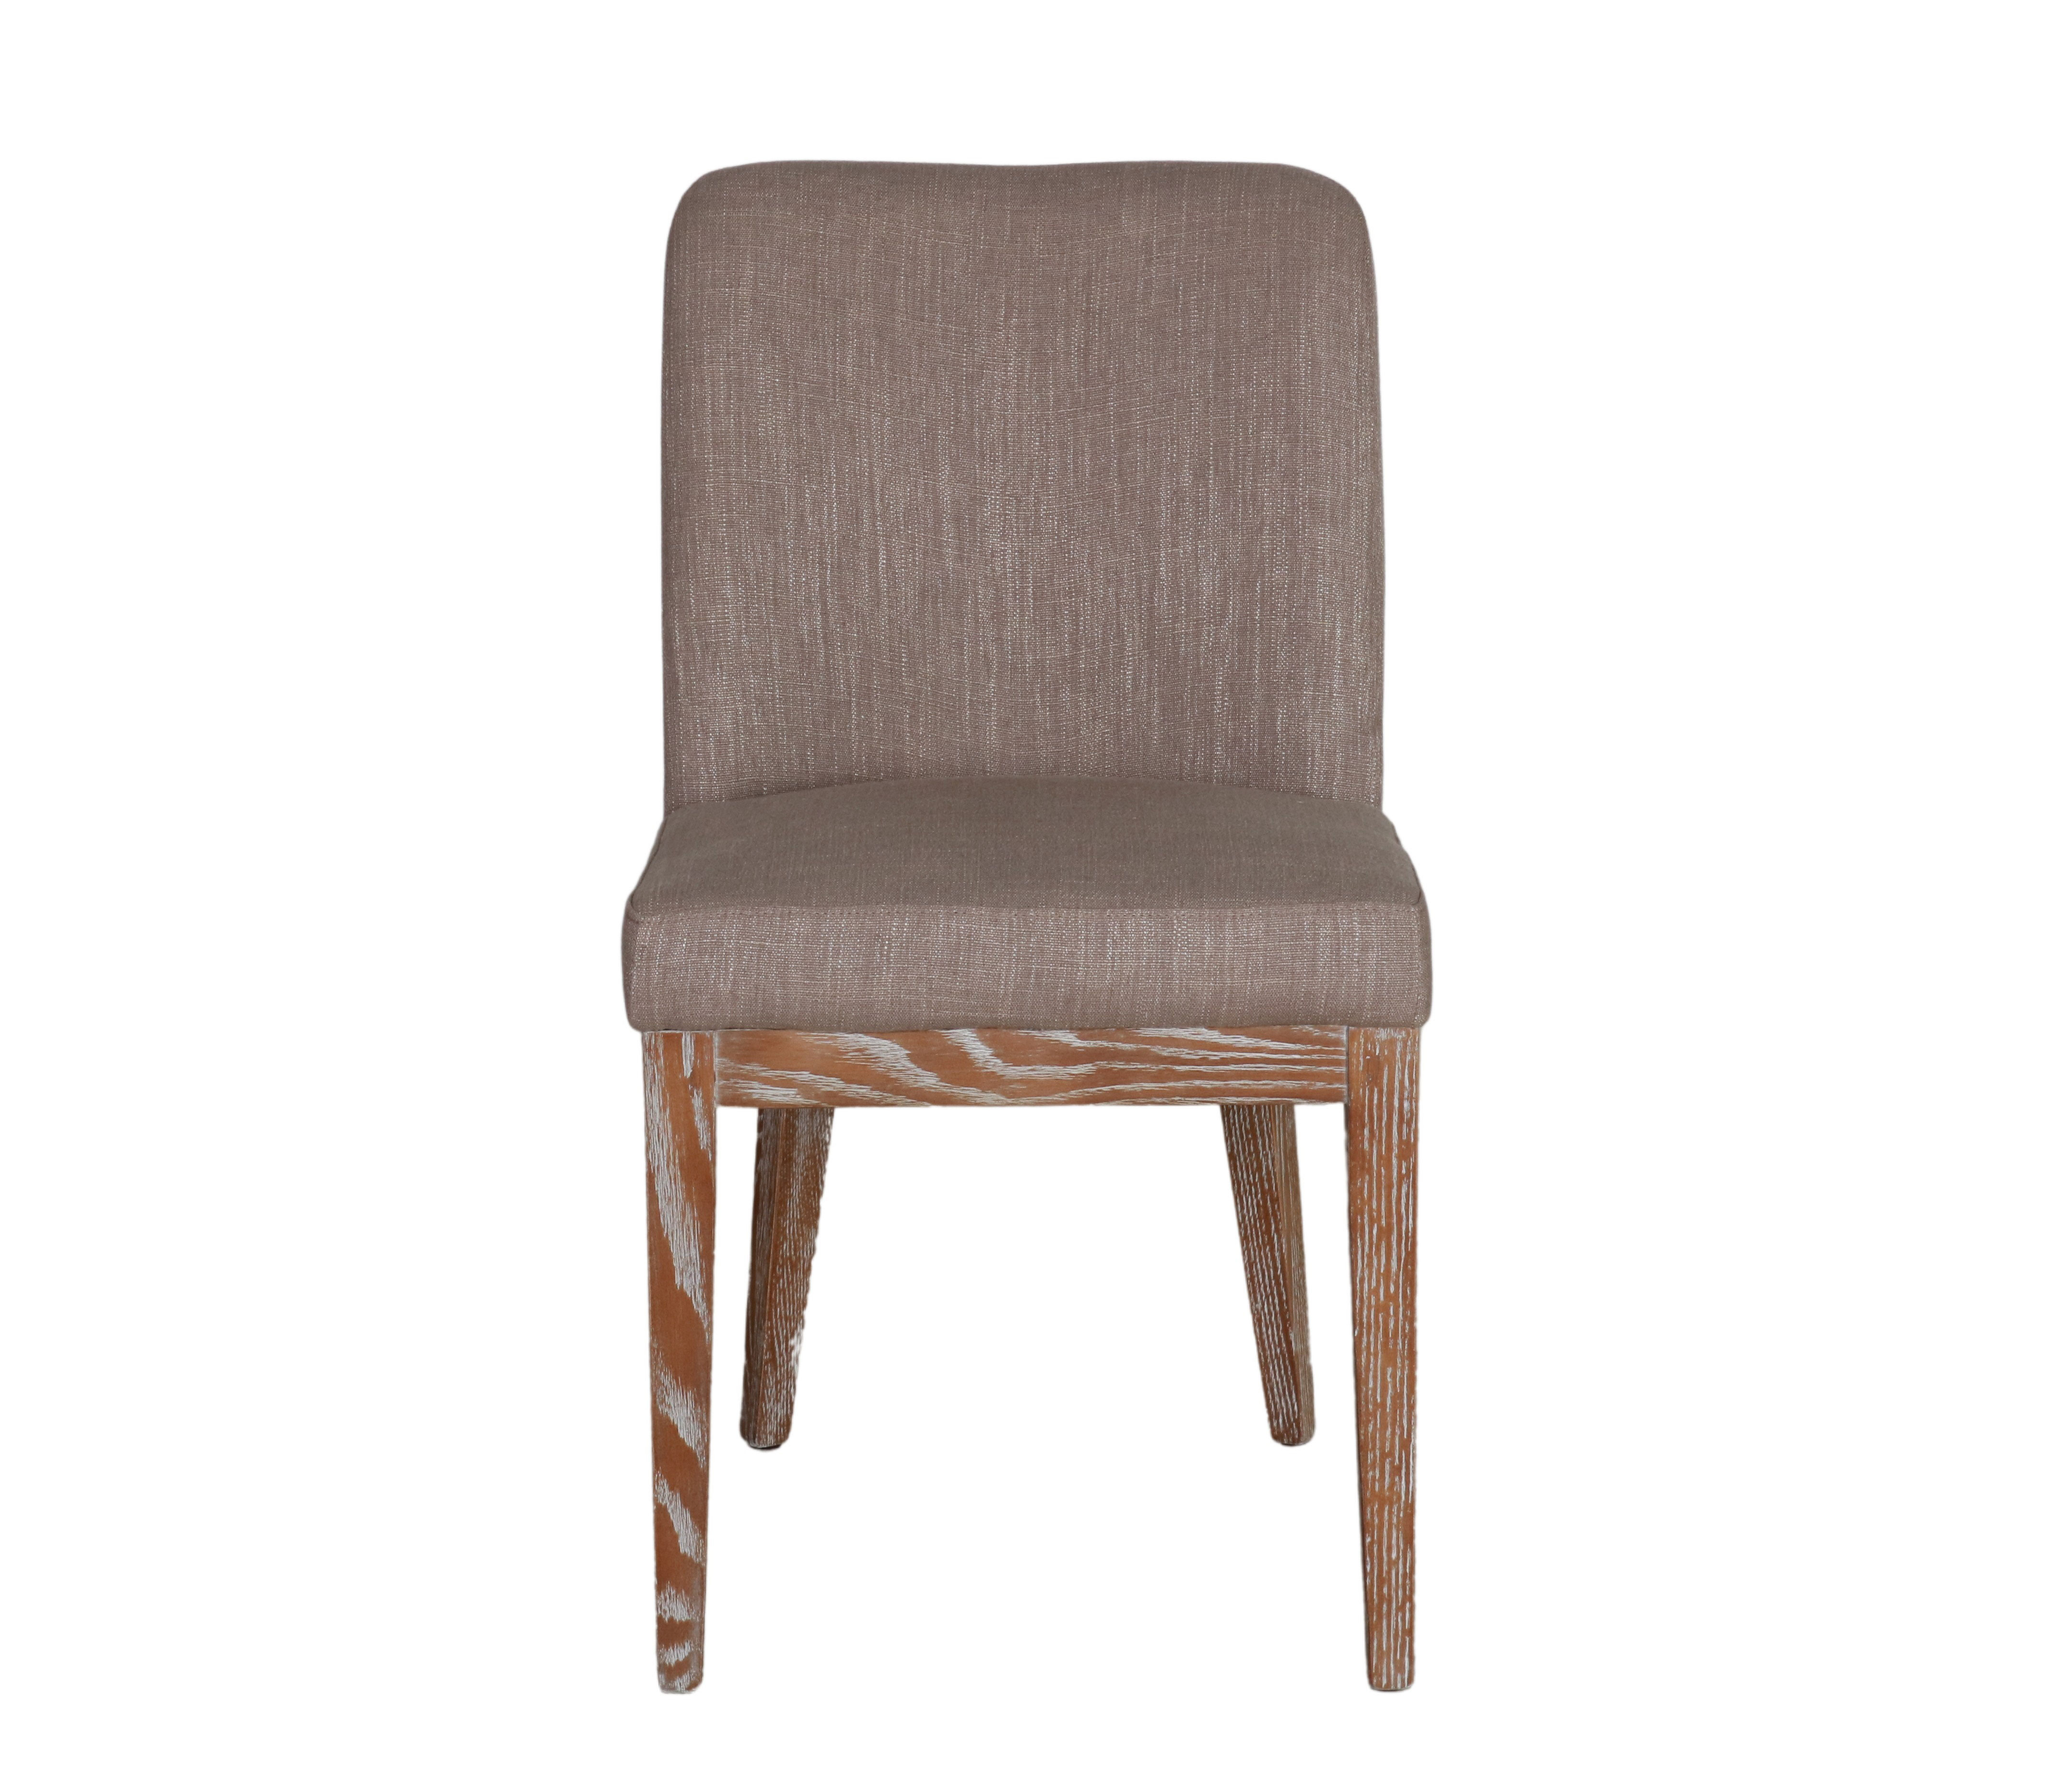 upholstered taupe dining chair with oak legs